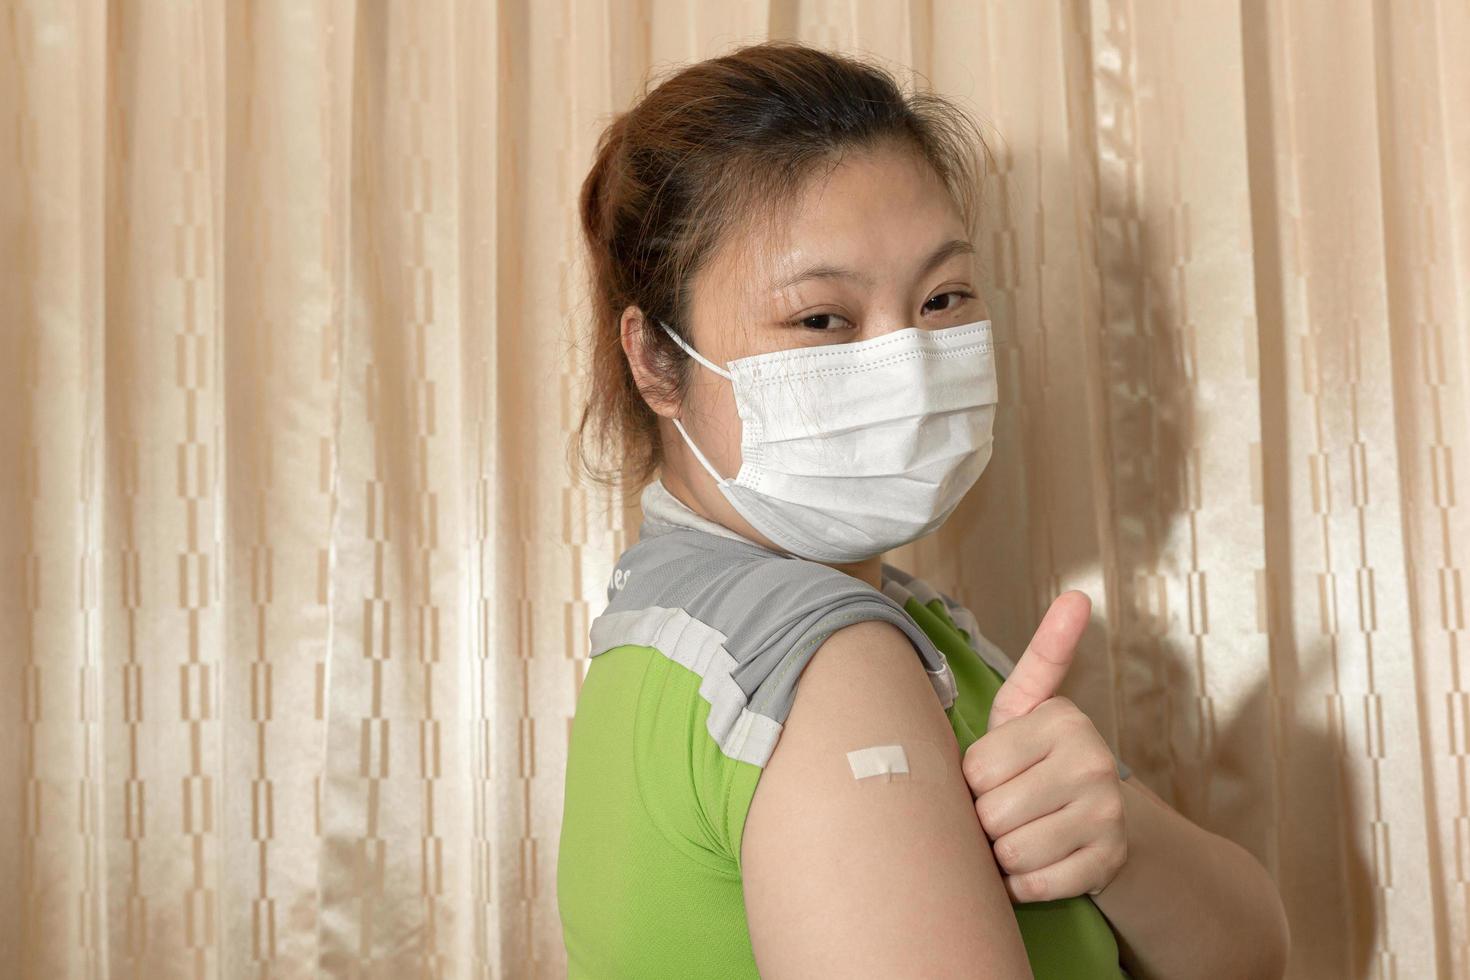 Asian woman wearing a mask, showing plaster on her arm after vaccination against COVID-19, coronavirus vaccination concept. photo